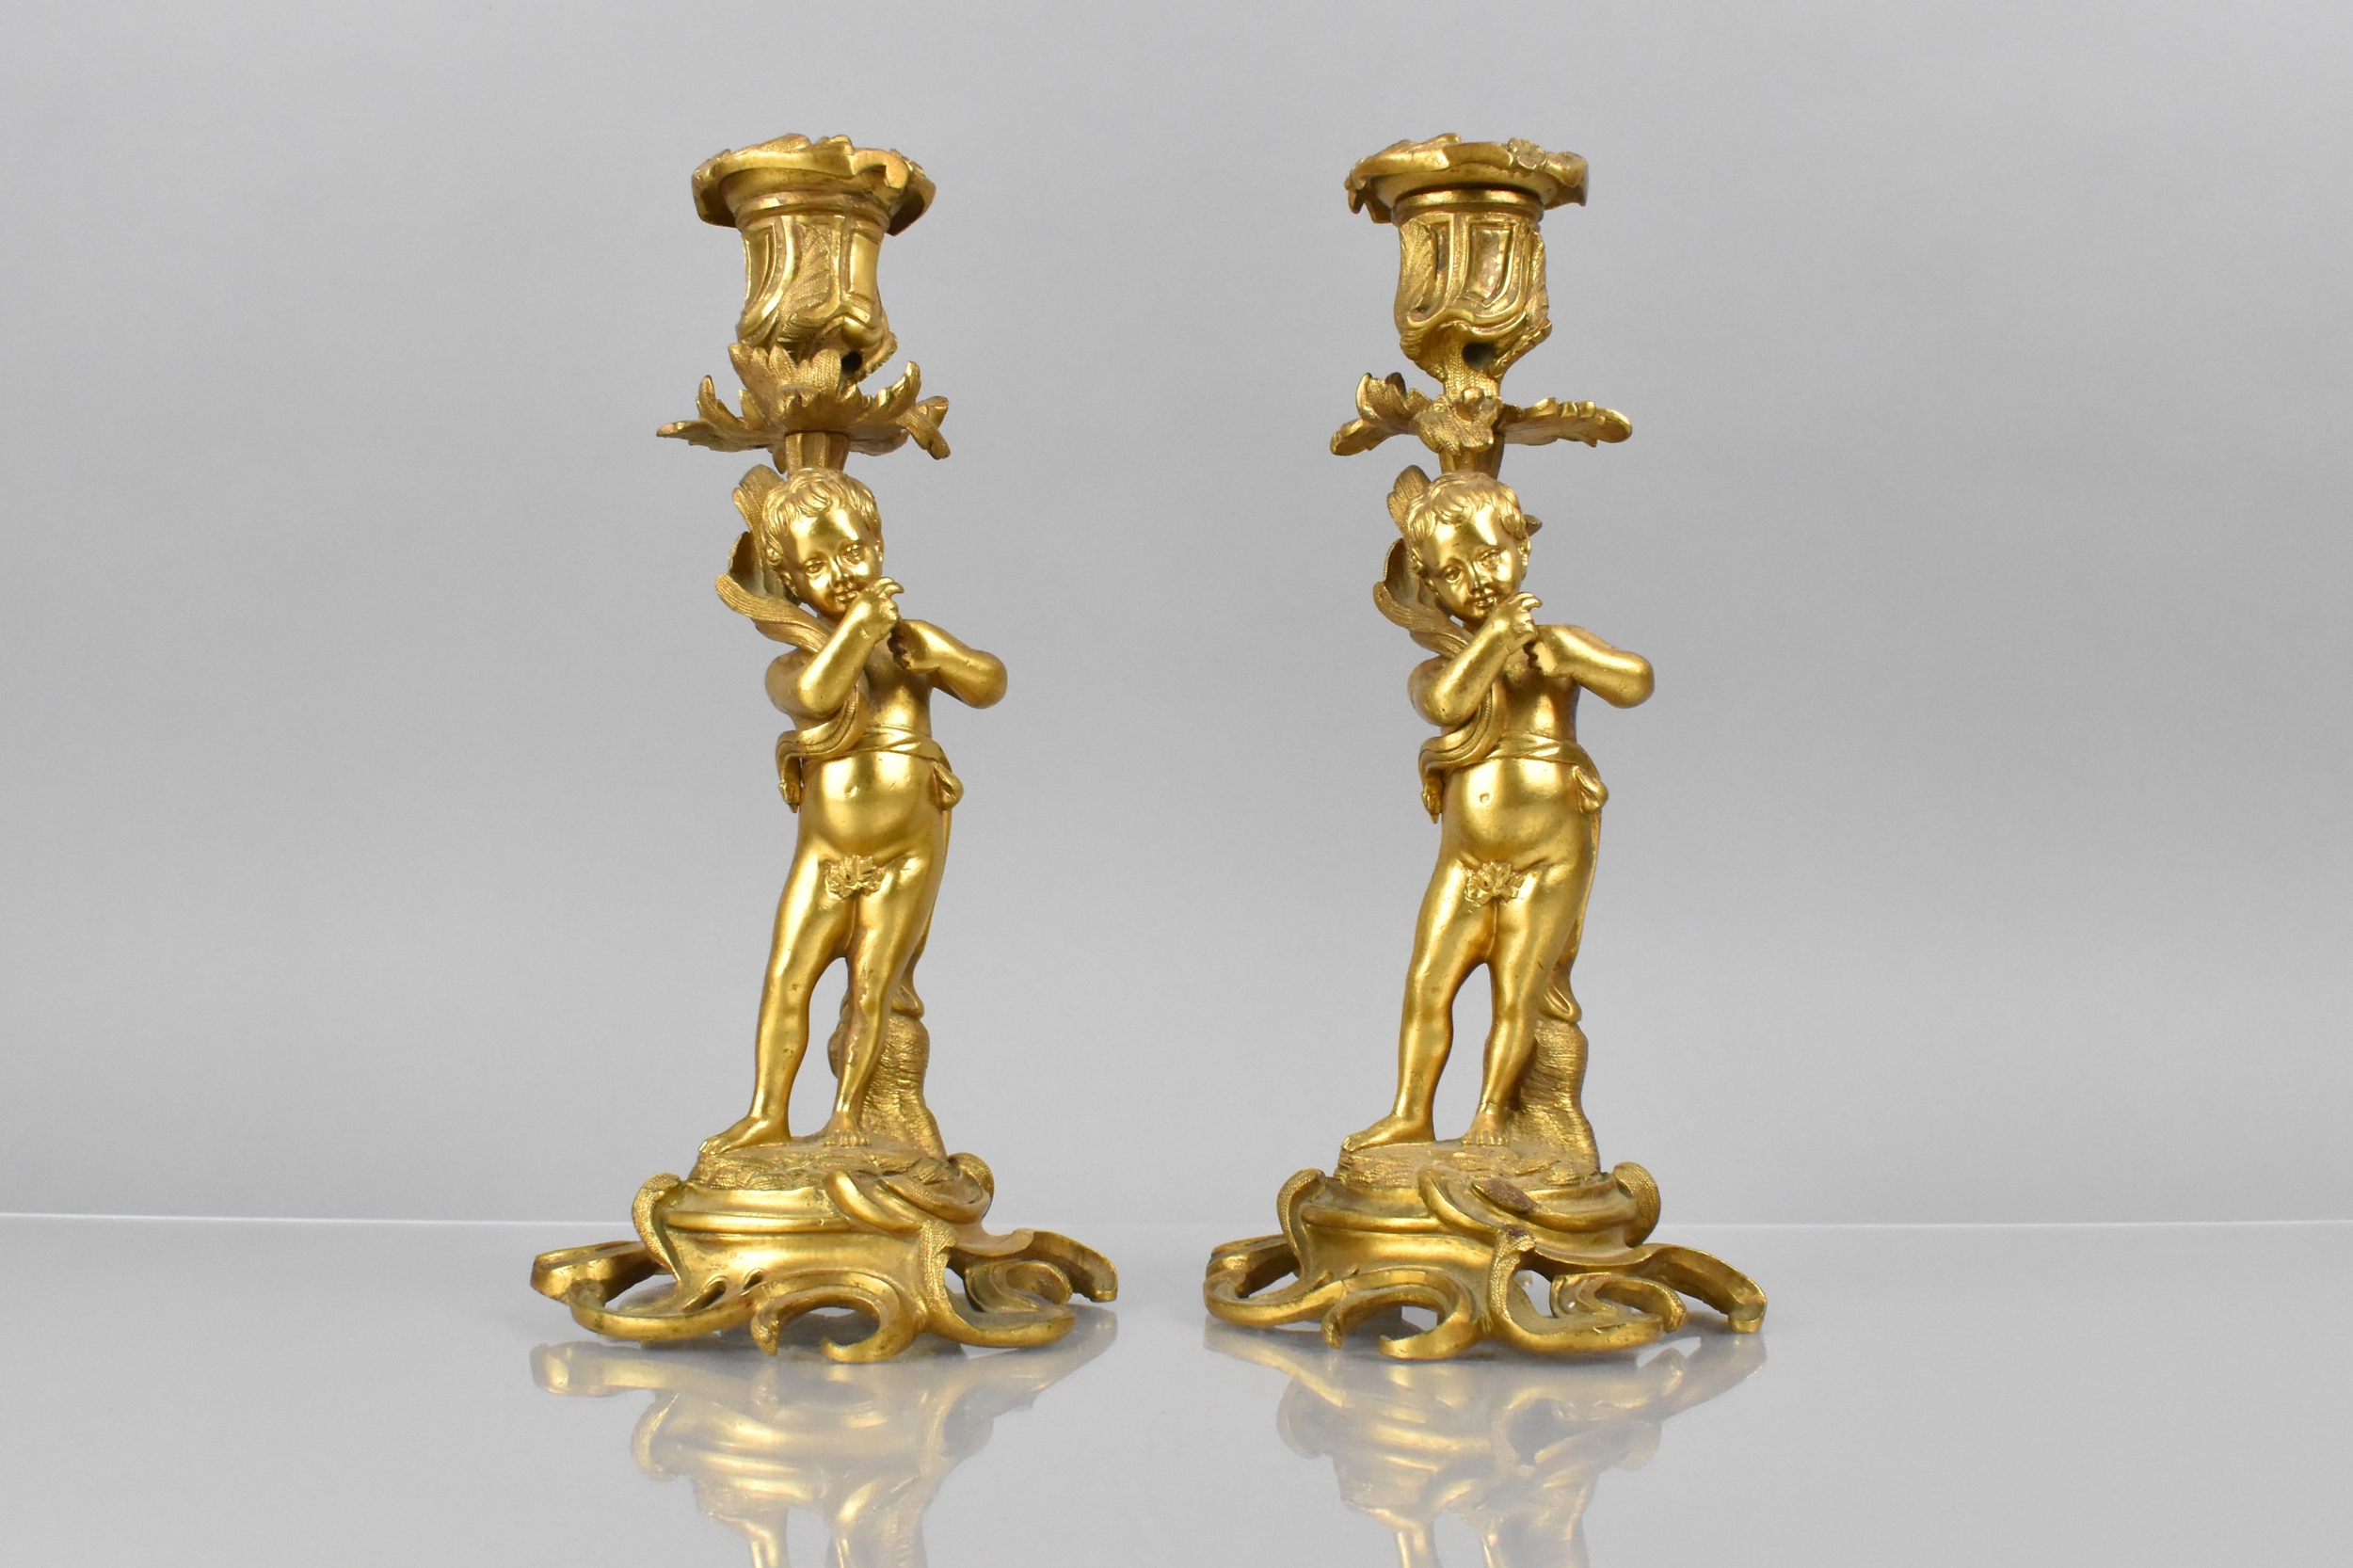 A Pair of 19th Century Gilt Bronze Candlesticks Modelled with Classical Cherubs Supporting